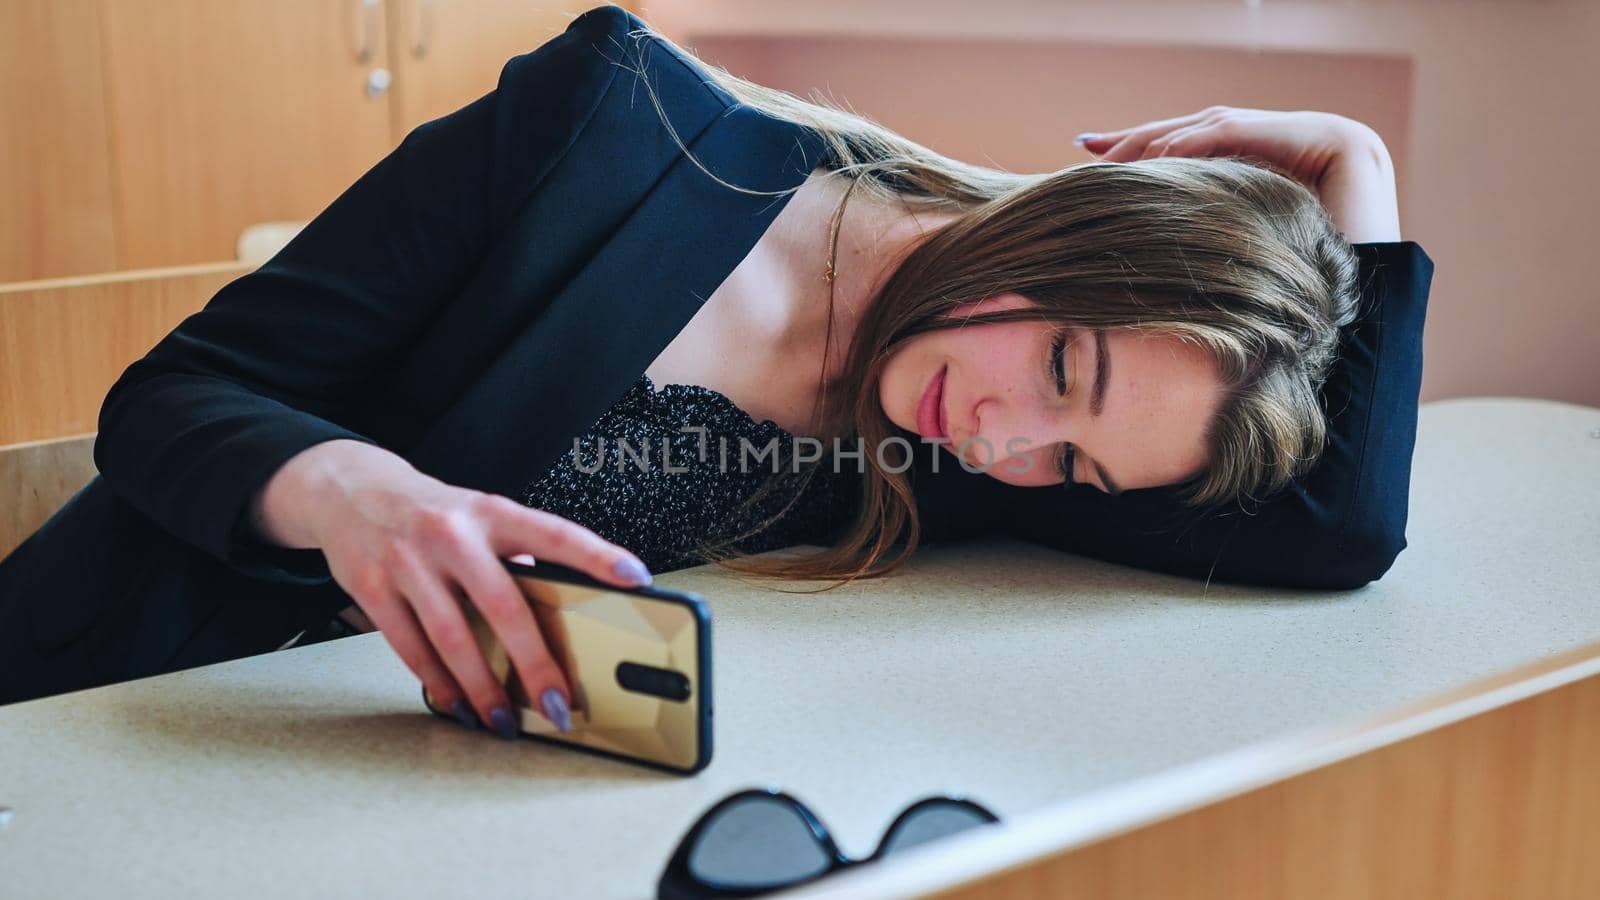 A tired student lying on her desk looks at her smartphone and then smiles